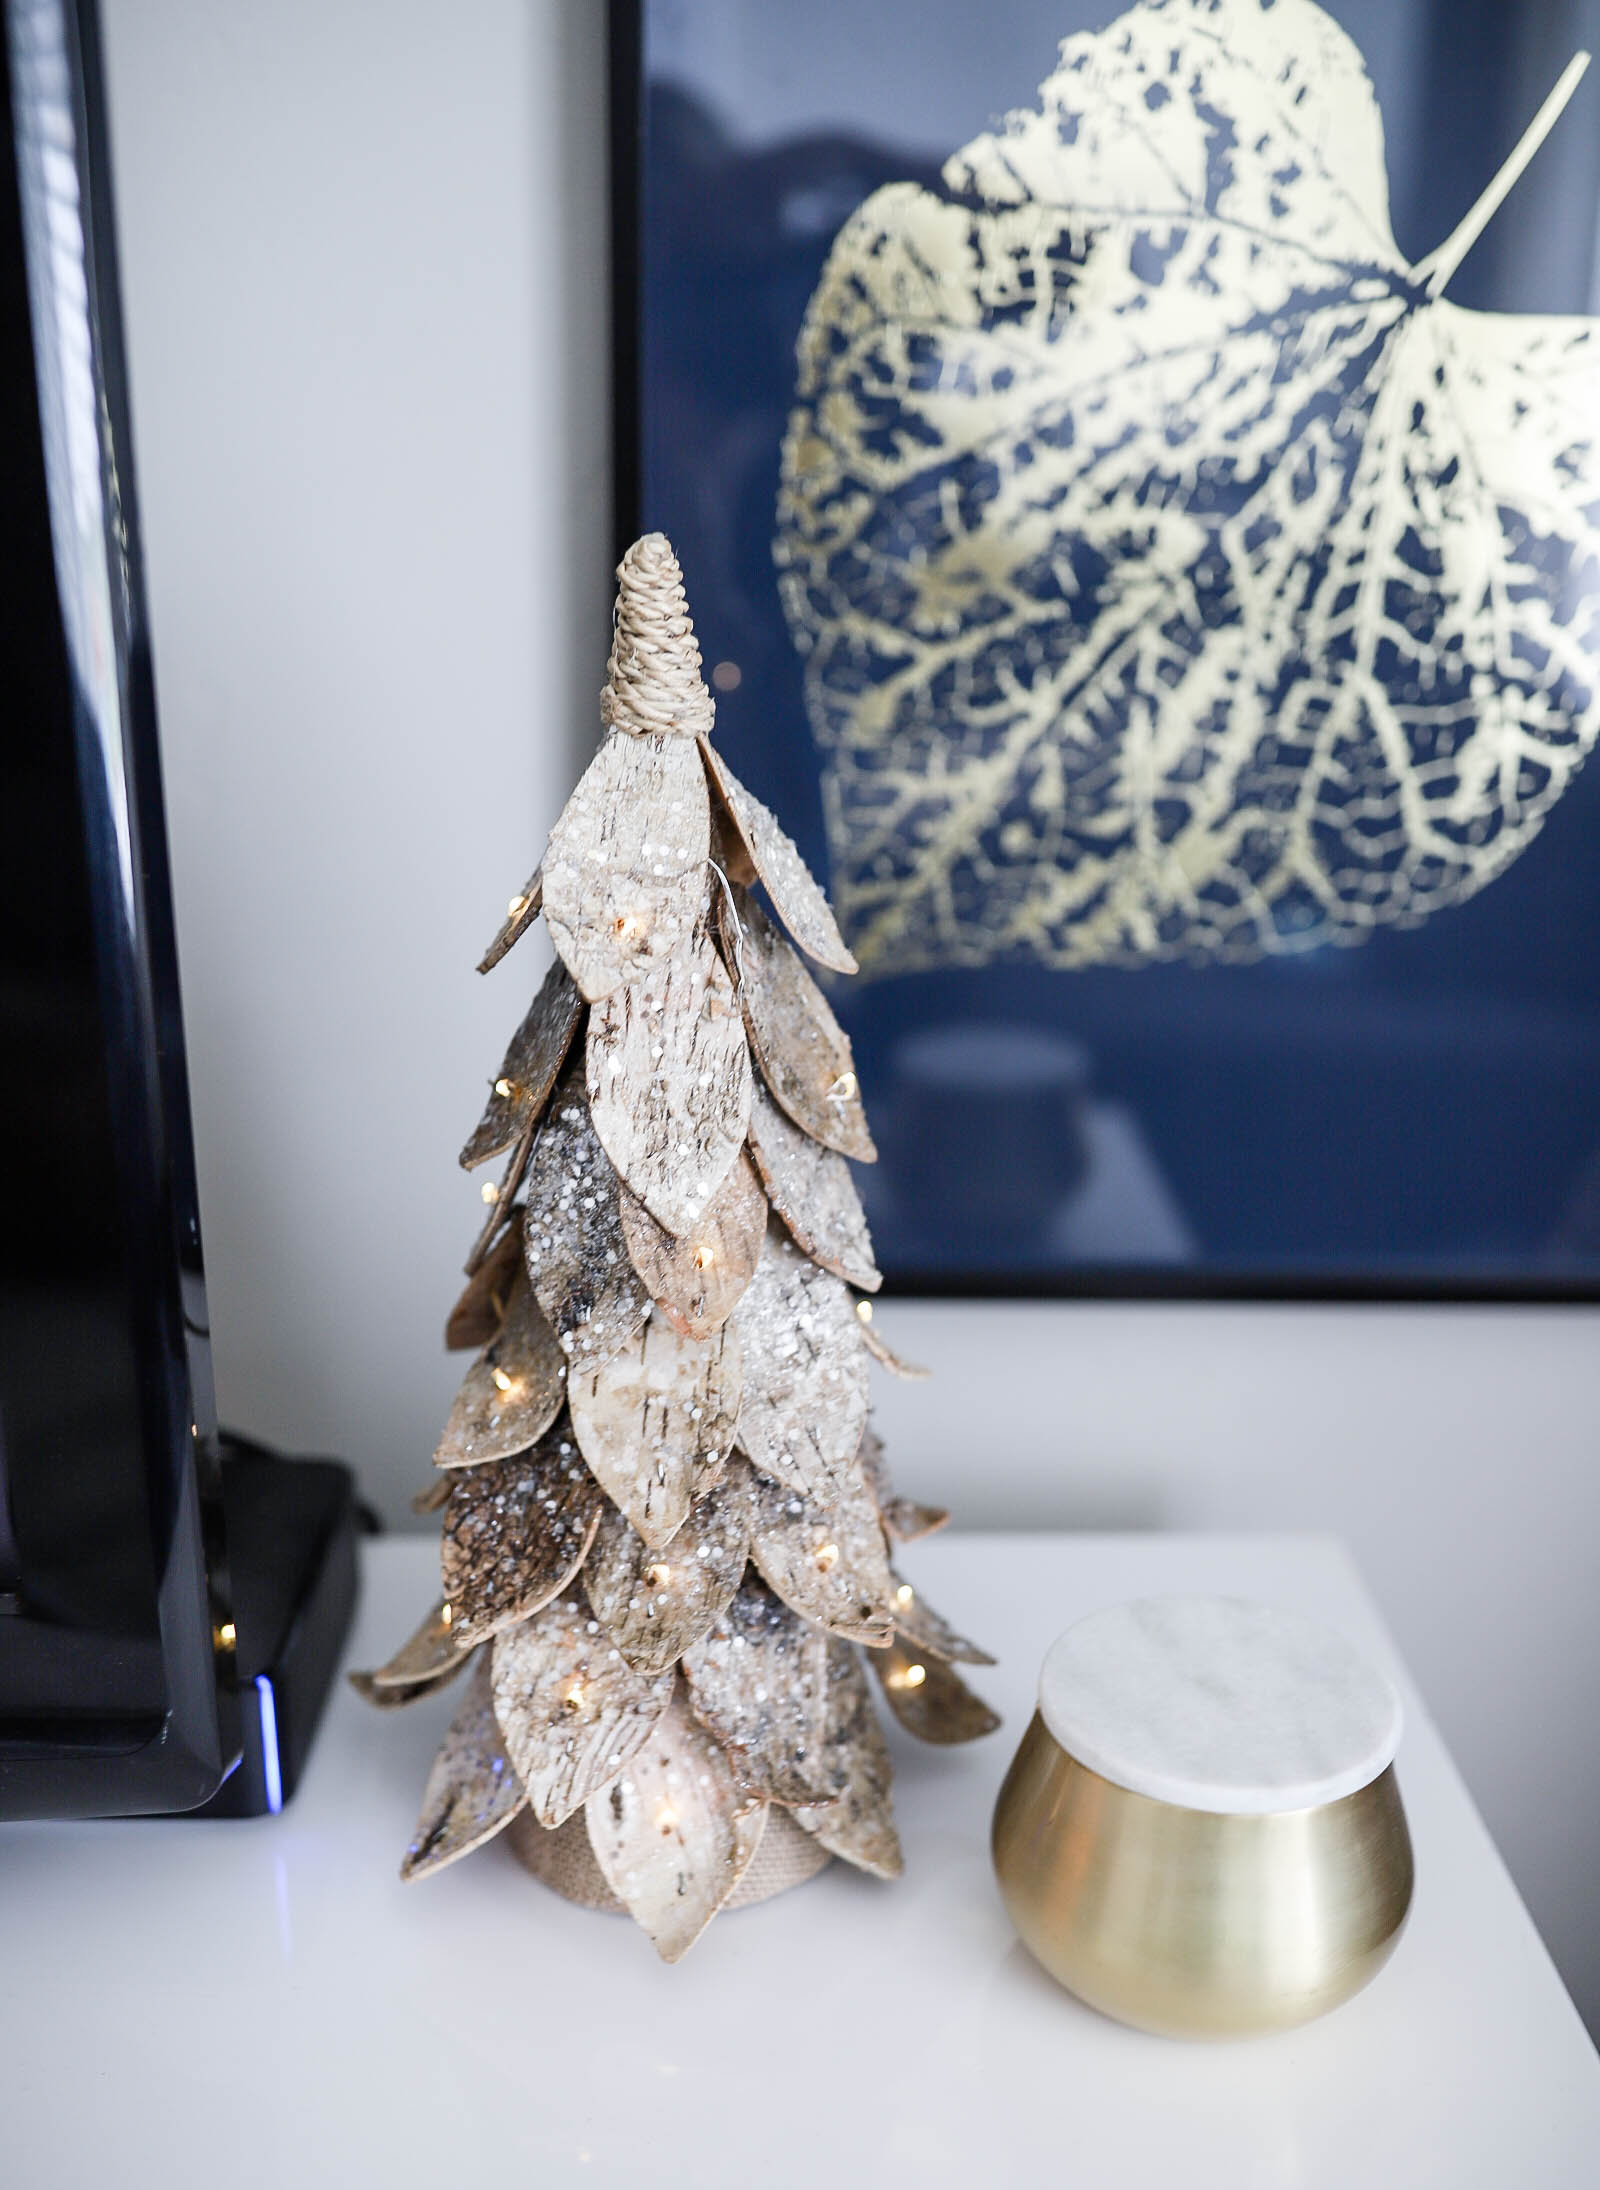 4 Simple Ways to Update Your Home Decor for the Holidays | gallery wall inspiration | minted art styling service | Little Miss Fearless